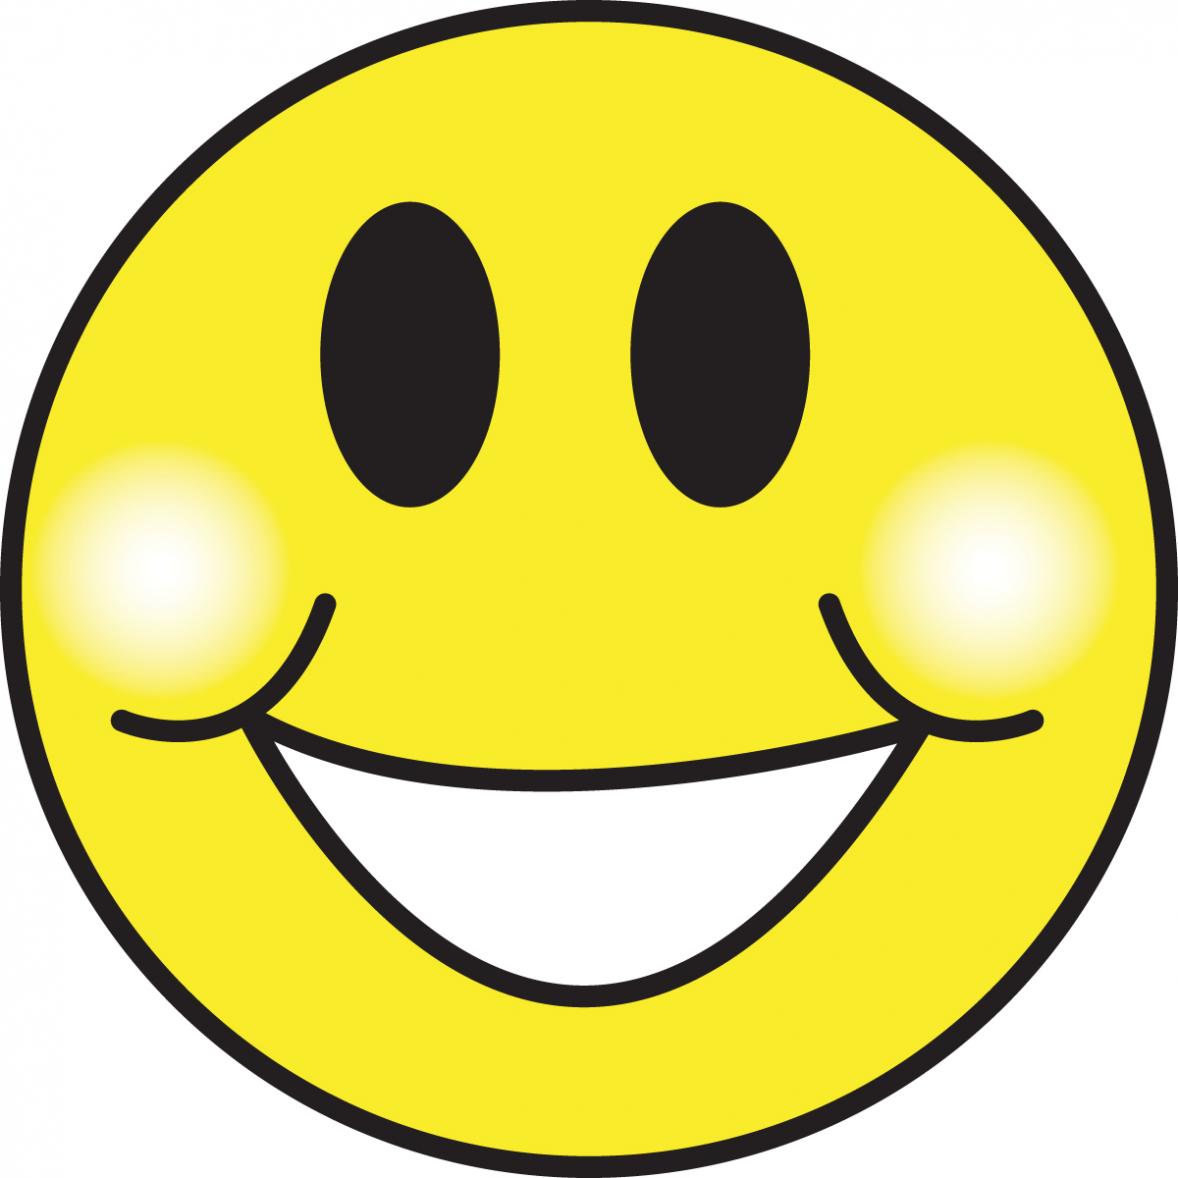 Related Pictures Smiley Face Thumbs Up Clipart Smile Day Site Car ...